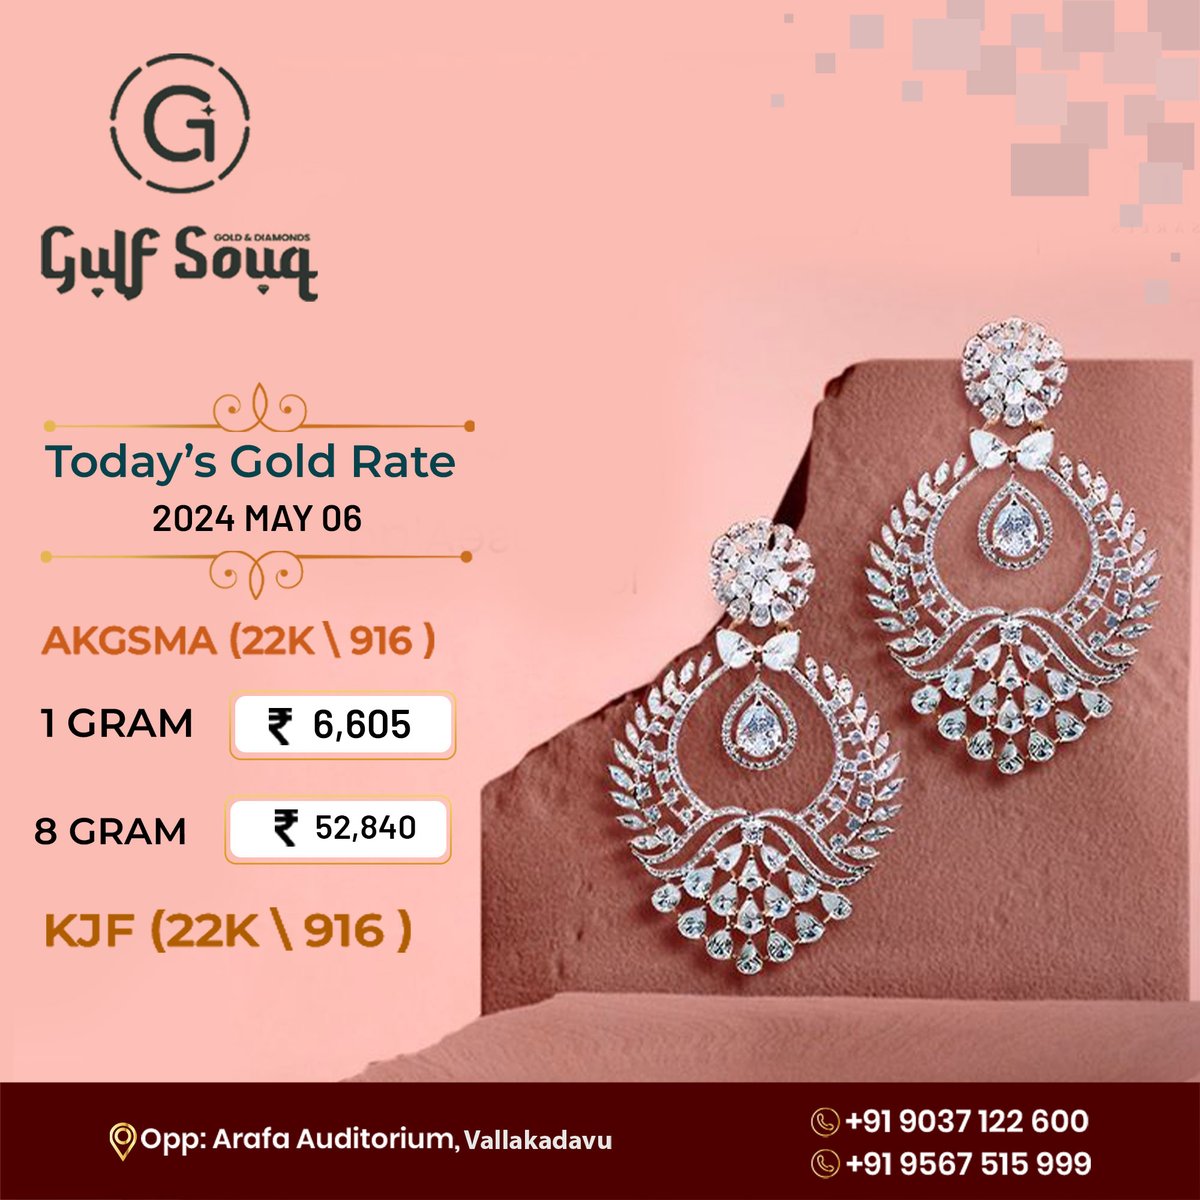 Finally on display is the glittering assortment of the Gulf Souq Jewellery Store✨👑
Today's Gold Rate:
1 Gram: 6,605/-
8 Gram: 52,840/-
#GulfSouq #JewelleryWholesaler #WholesaleJewellery
#LuxuryFashion #jewellery